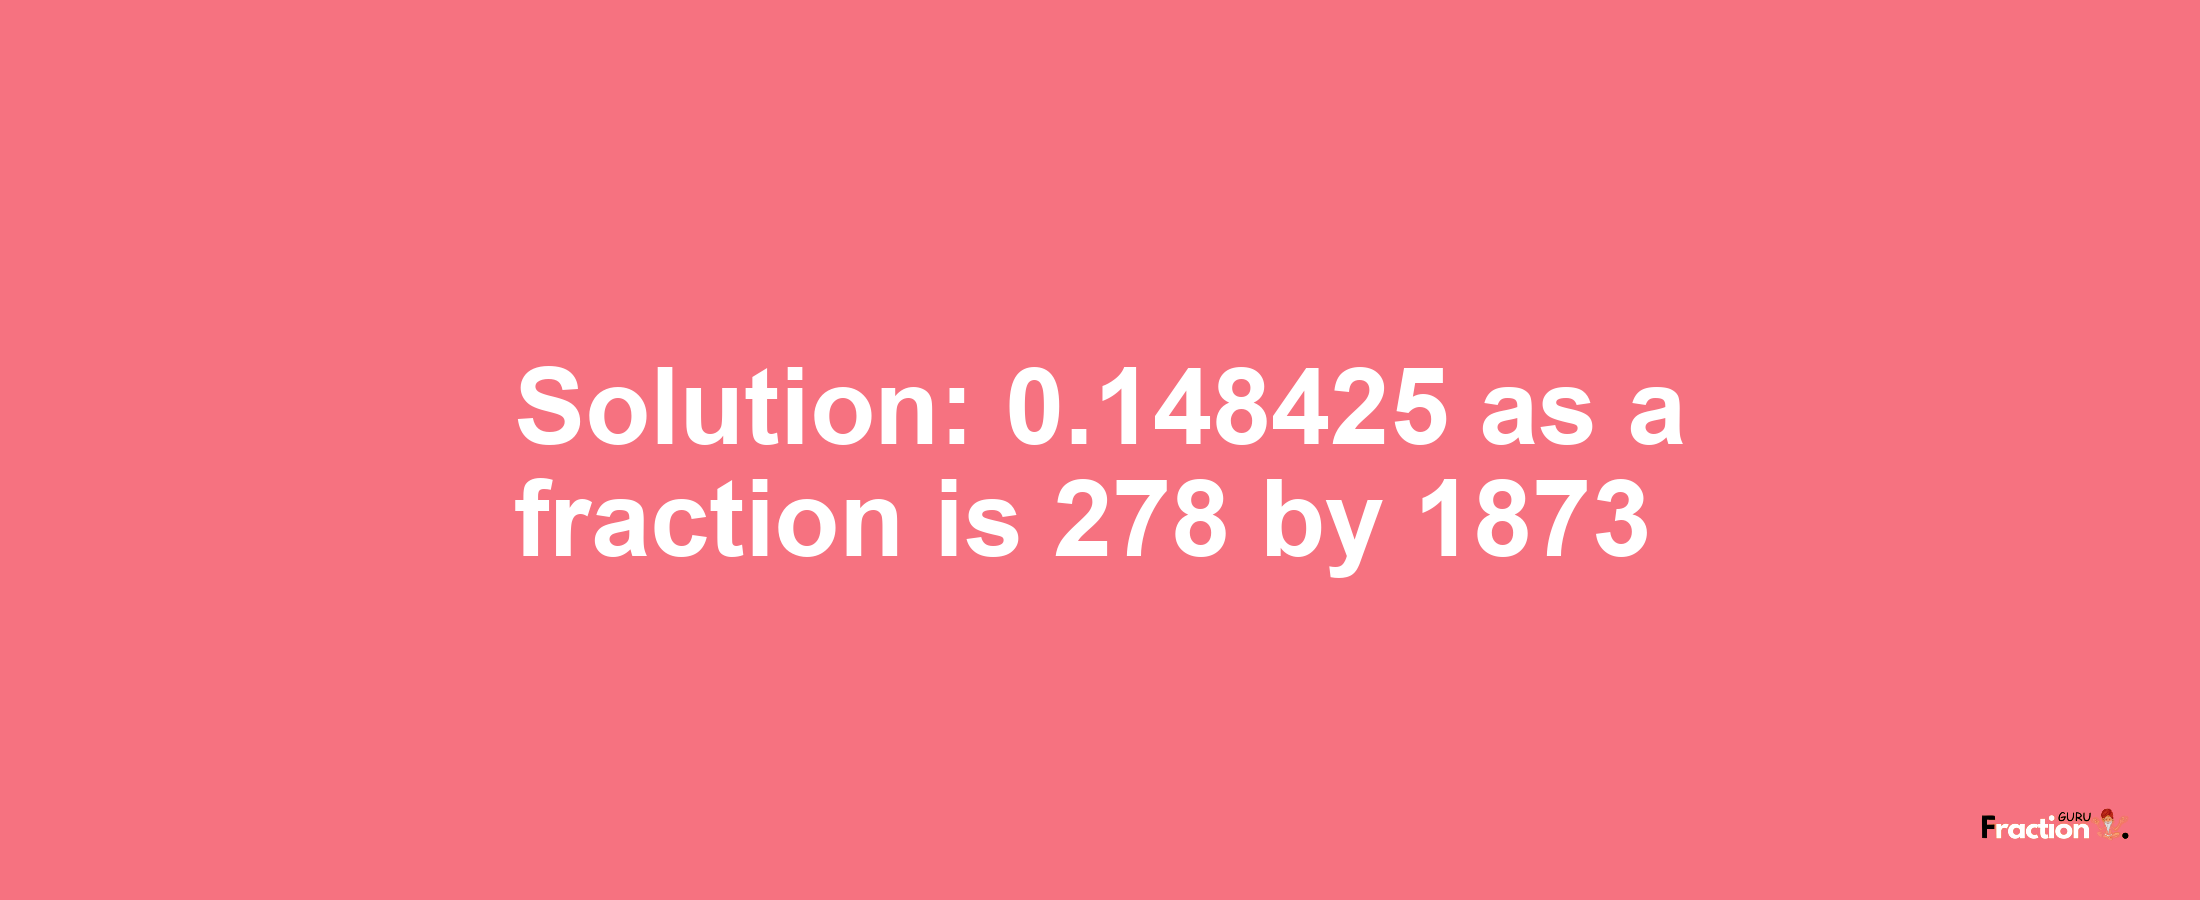 Solution:0.148425 as a fraction is 278/1873